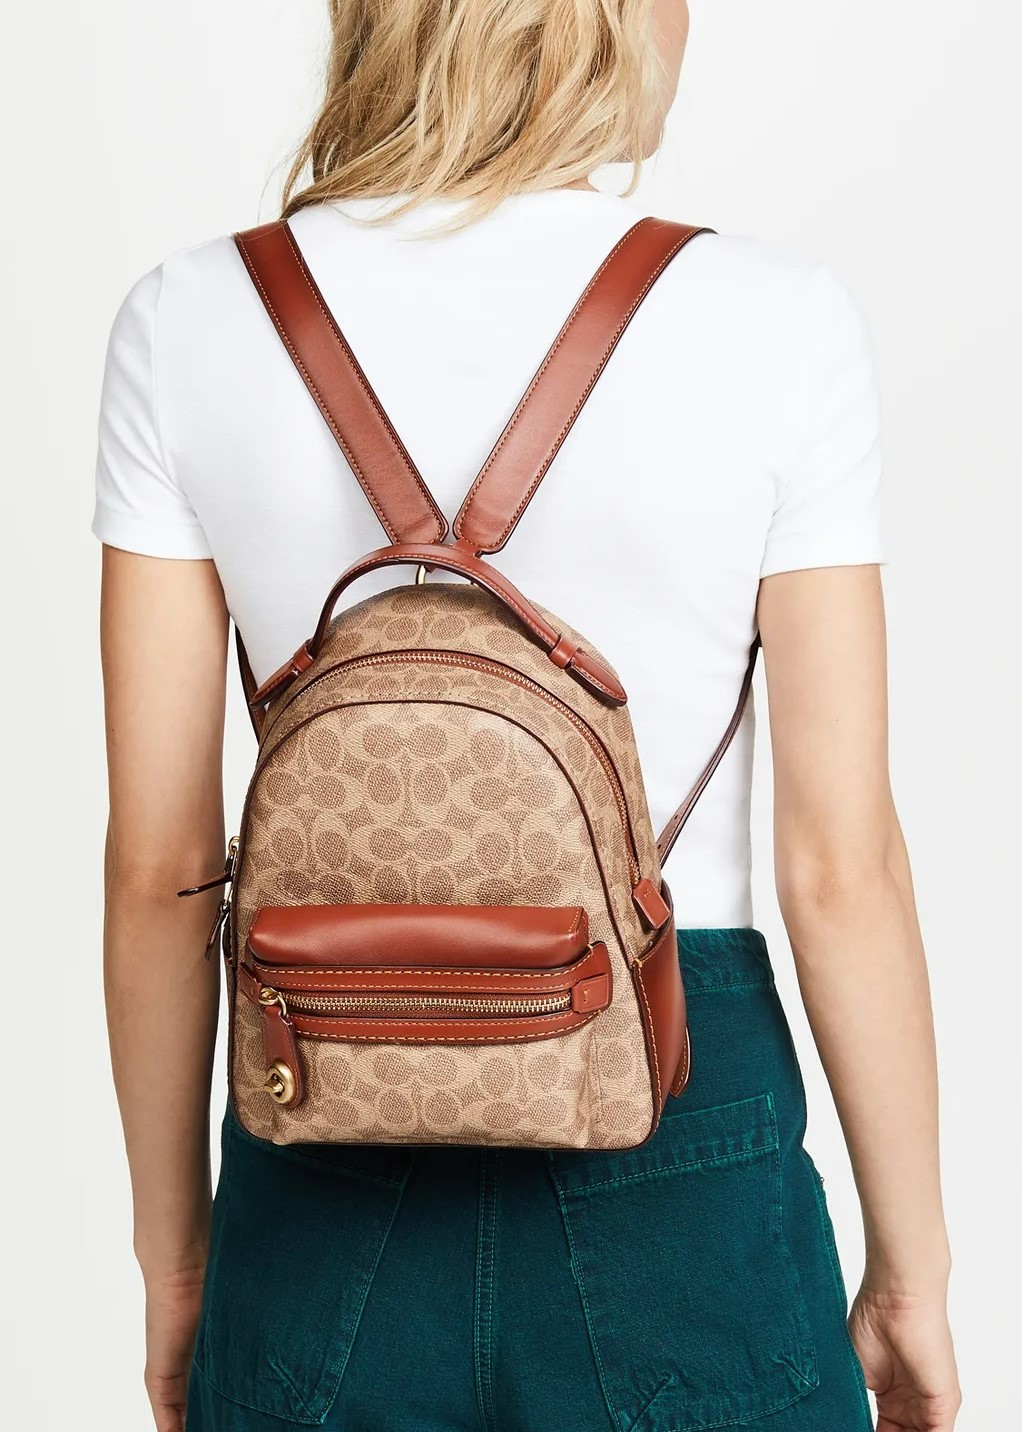 BALO COACH NỮ KÈM KHÓA XOAY CAMPUS BACKPACK 23 IN SIGNATURE CANVAS 9